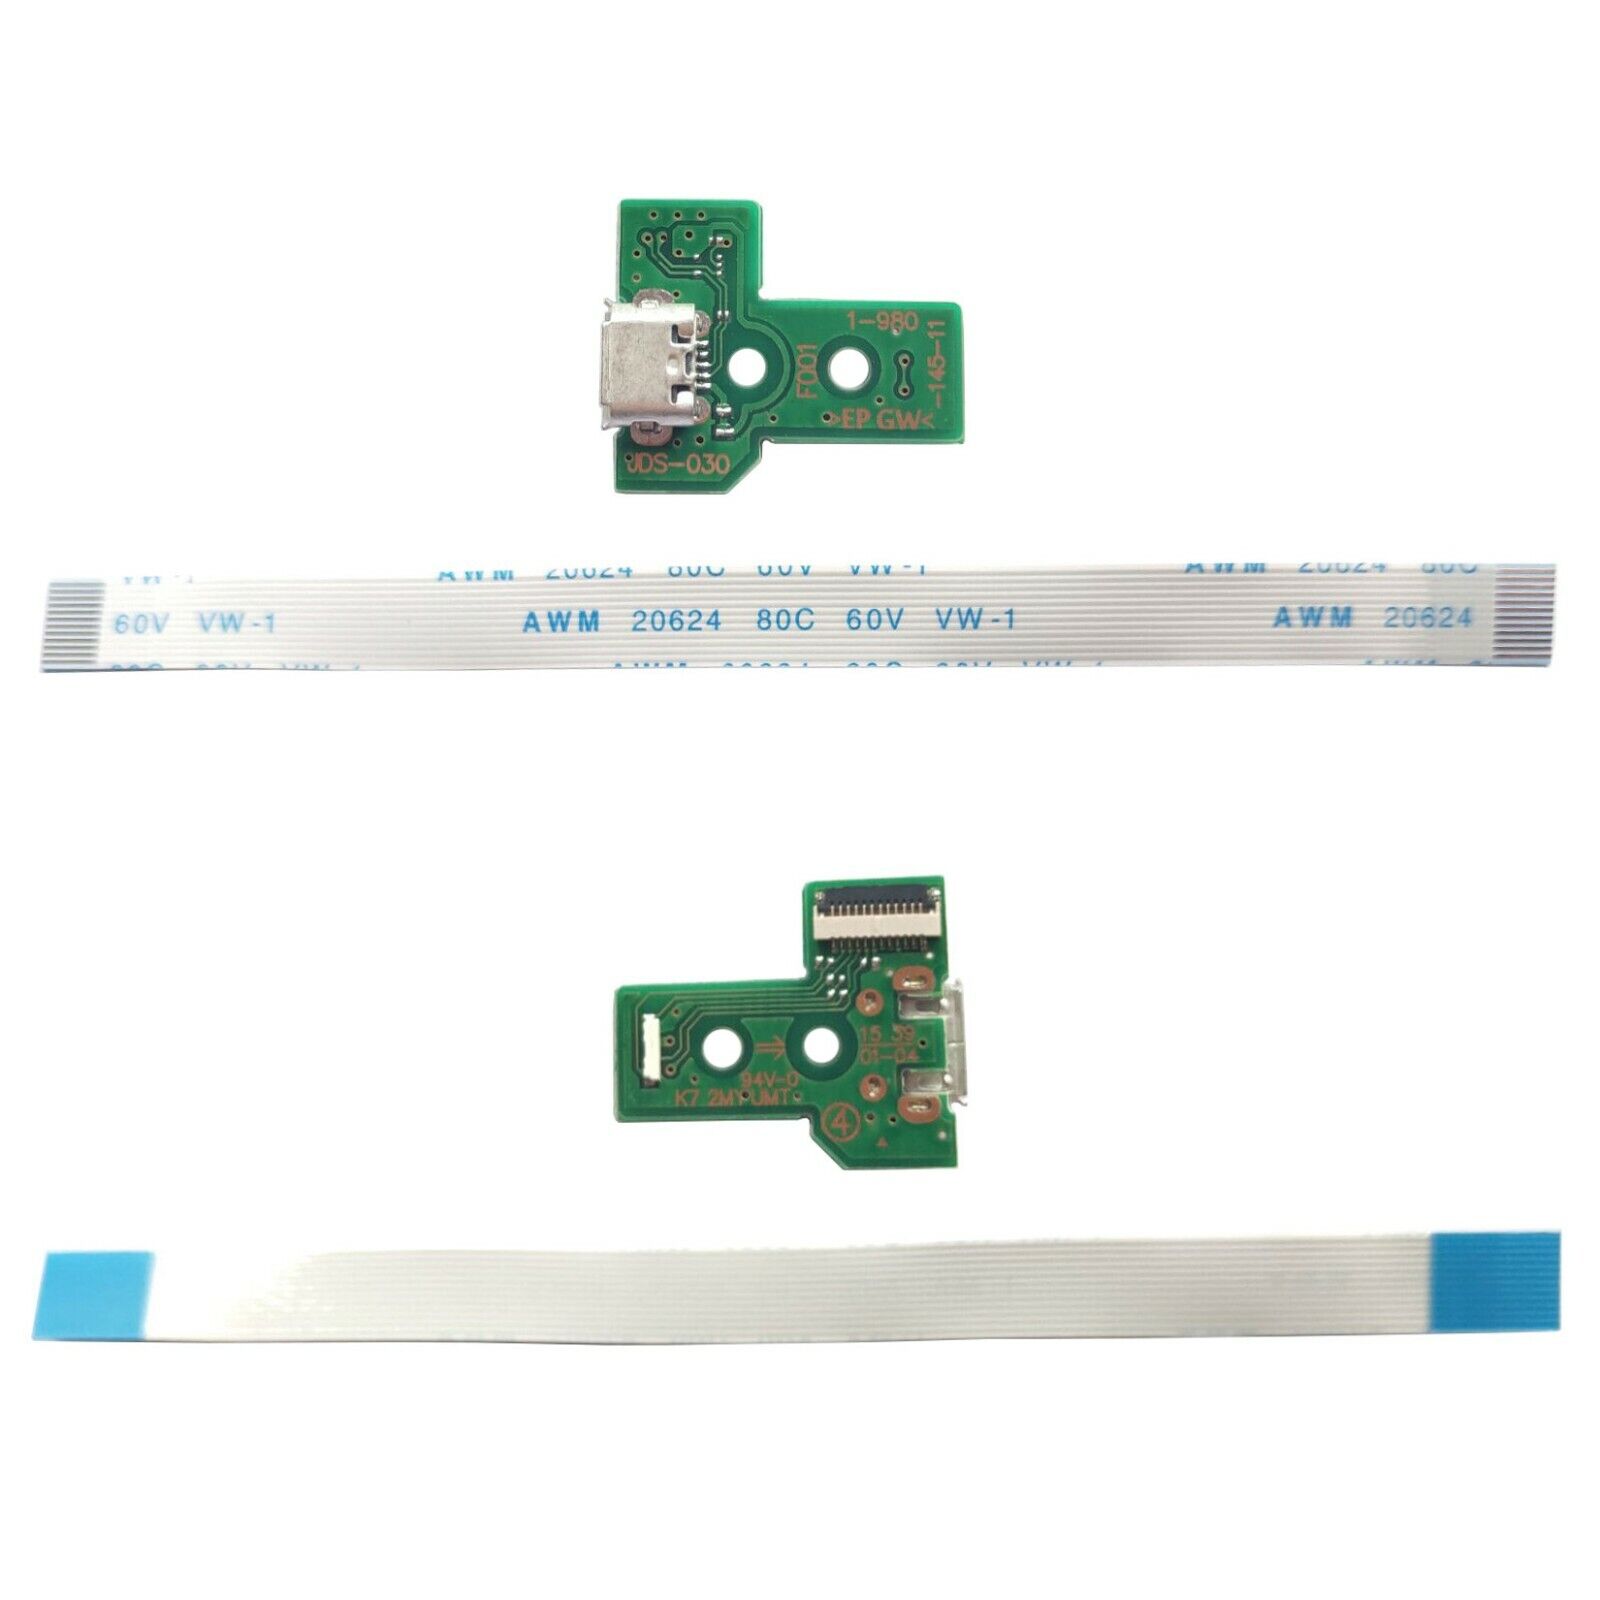 2x USB Charging Port Board Controller JDS-030 and 12 Pin Cable for Sony PS4 A227 Unbranded/Generic JDS-030